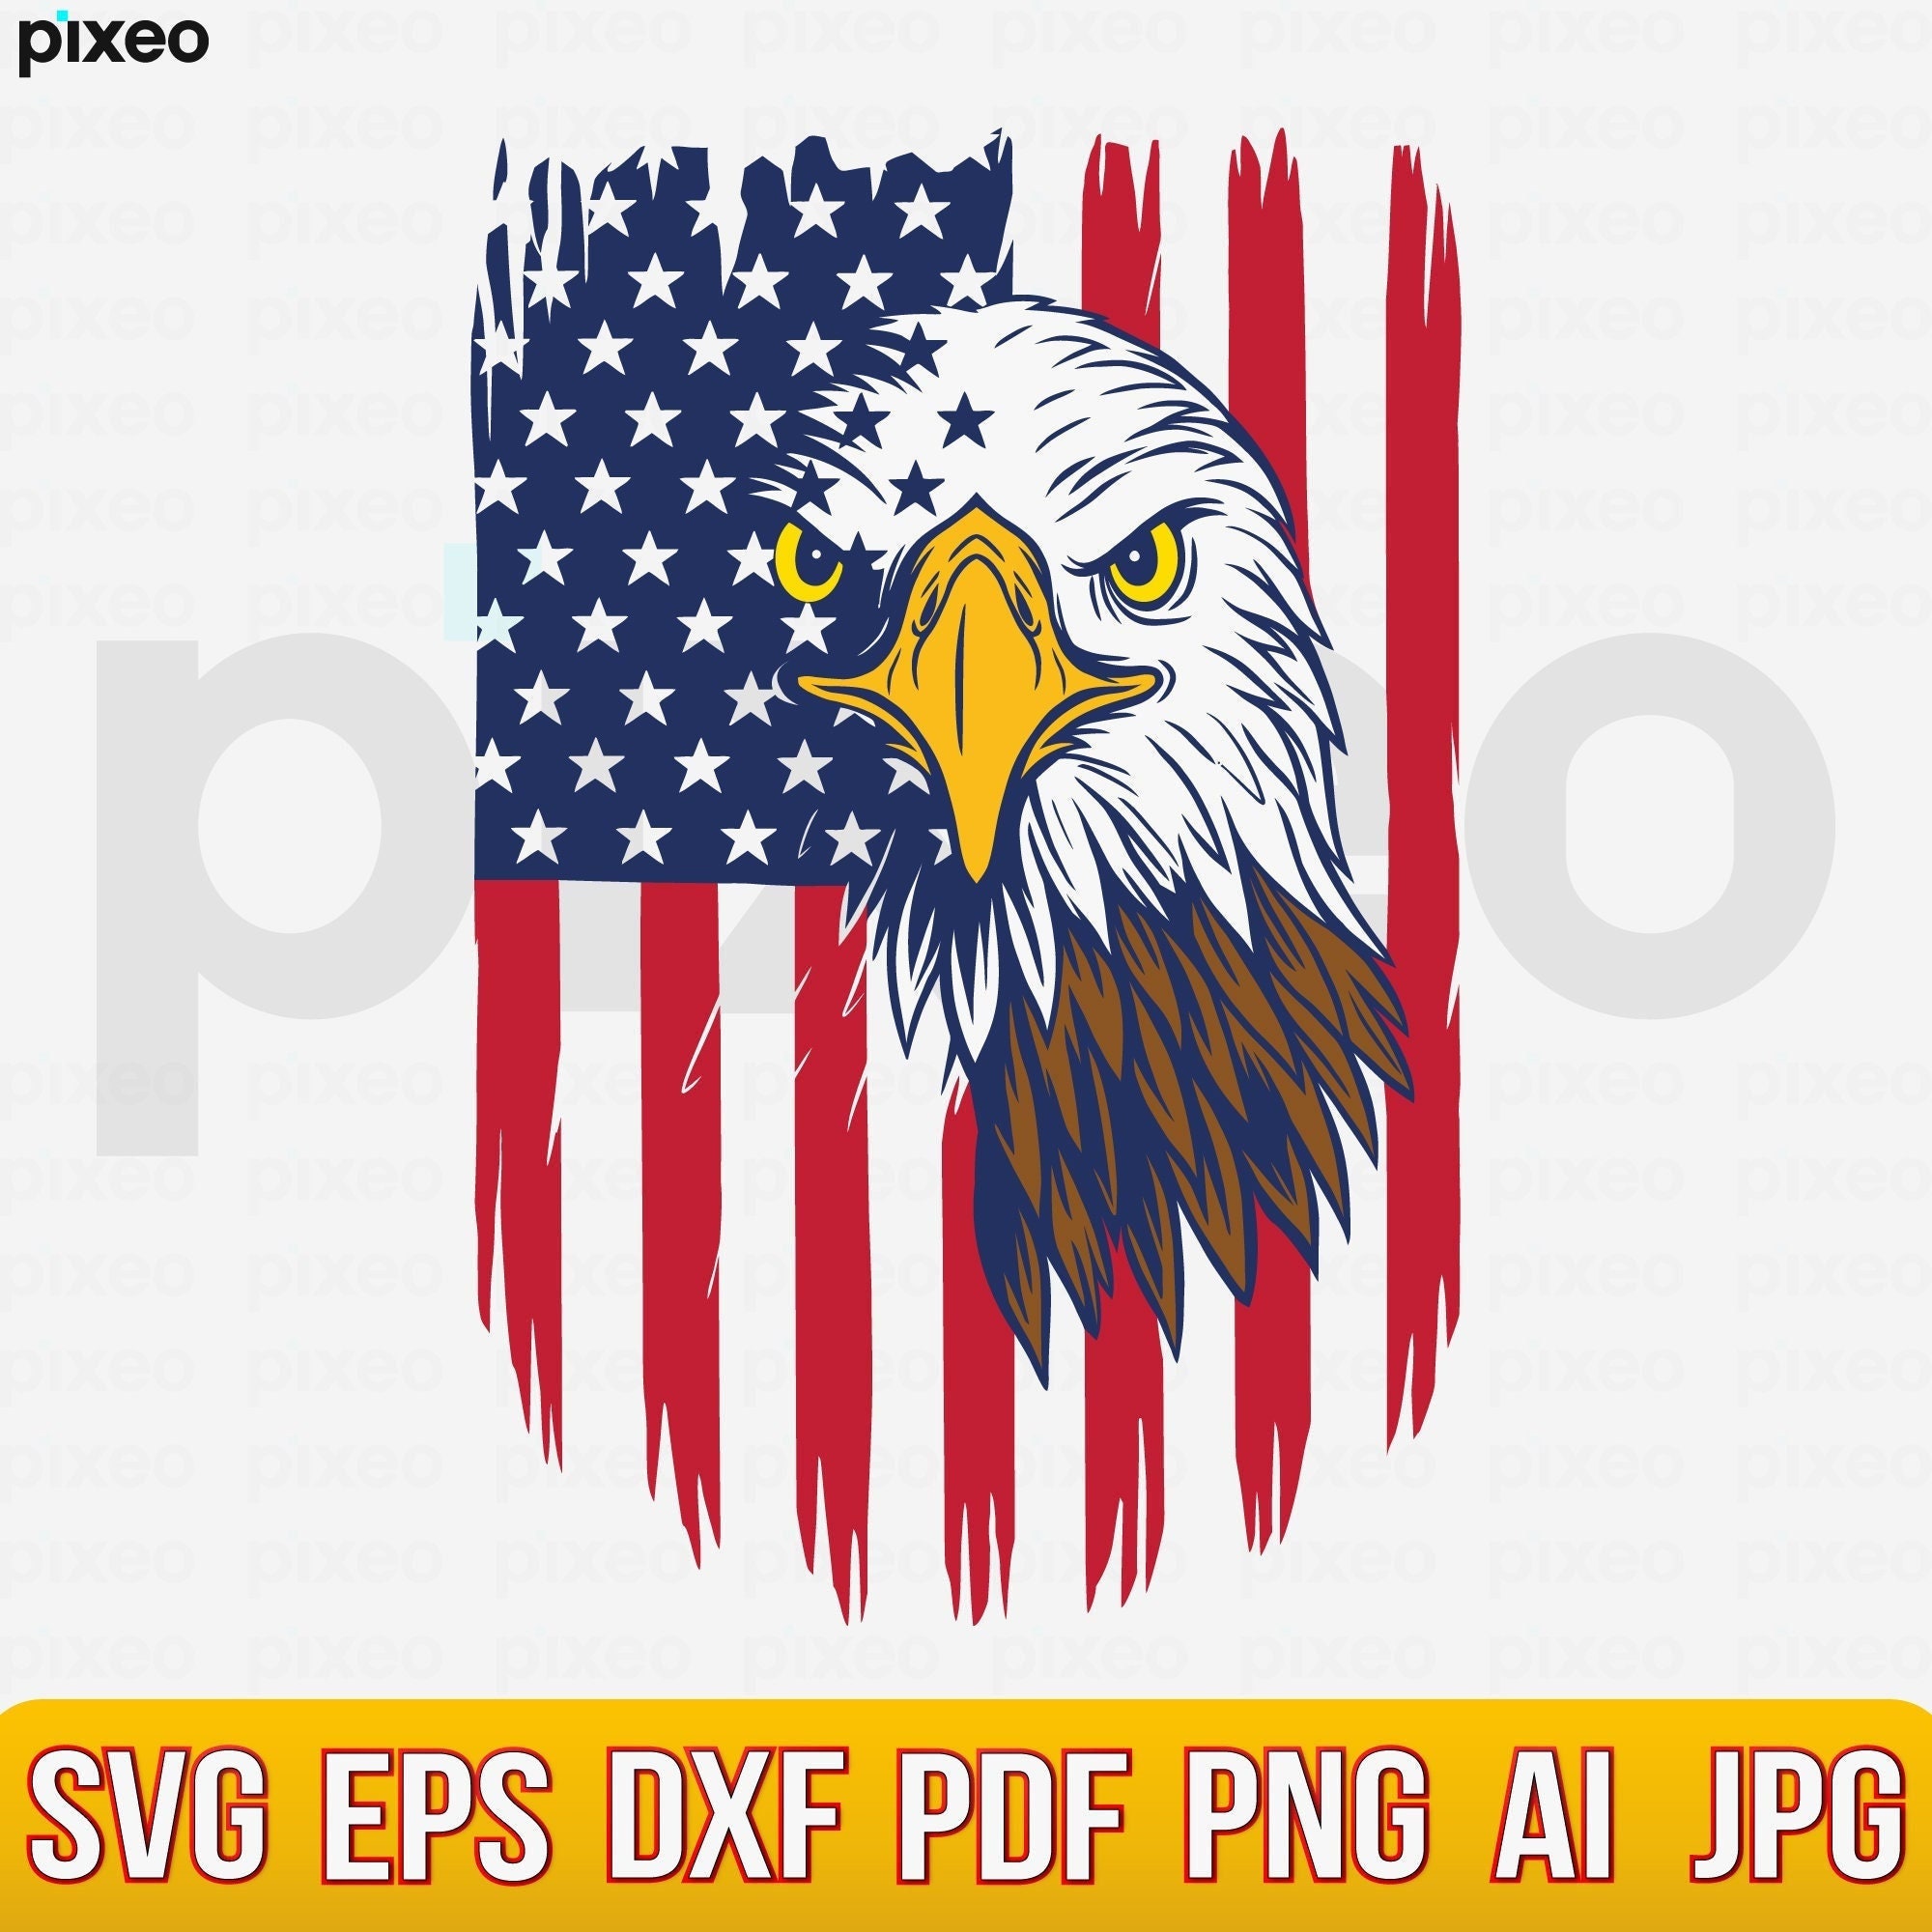 Premium Vector  Pixel art flagpole with red flag vector icon for 8bit game  on white background